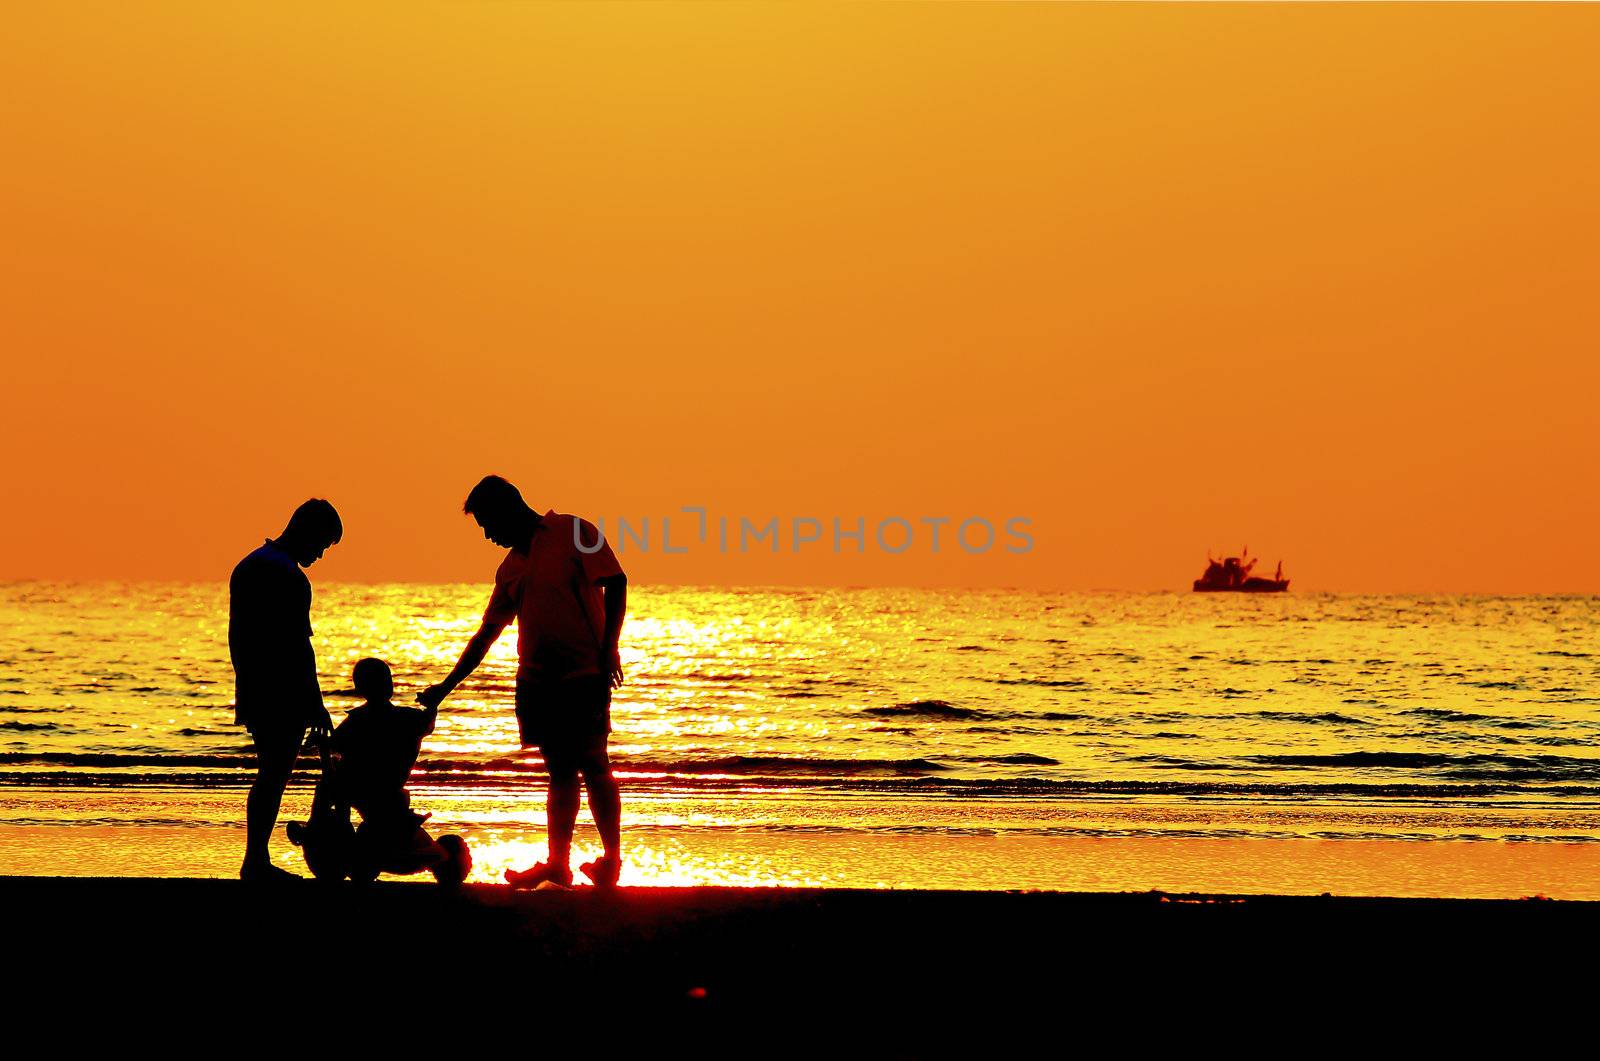 Silhouette image of father  child by the sea shore, sunset 
 by rufous